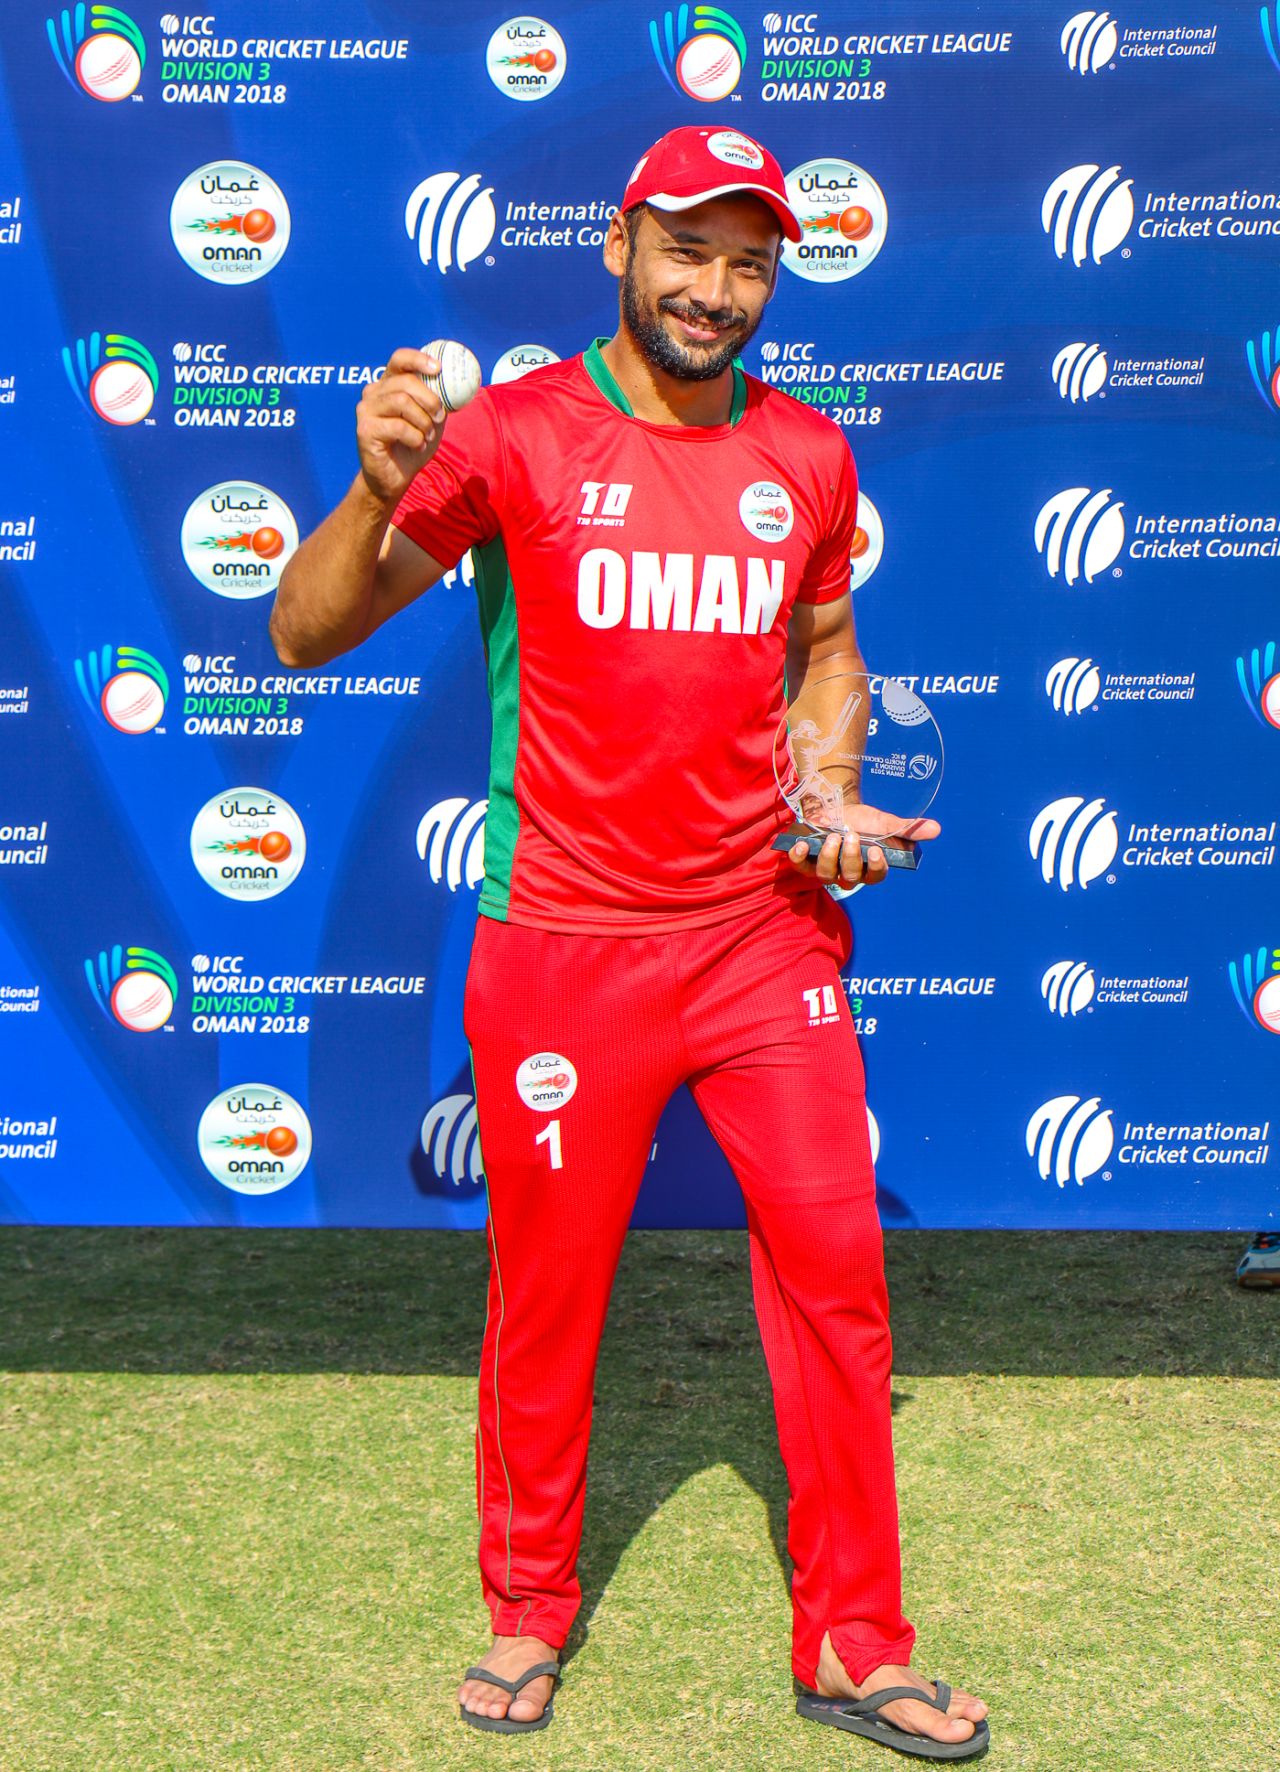 Fayyaz Butt claimed the Man of the Match award for his hat-trick and 5 for 22, Oman v Uganda, ICC World Cricket League Division Three, Al Amerat, November 18, 2018